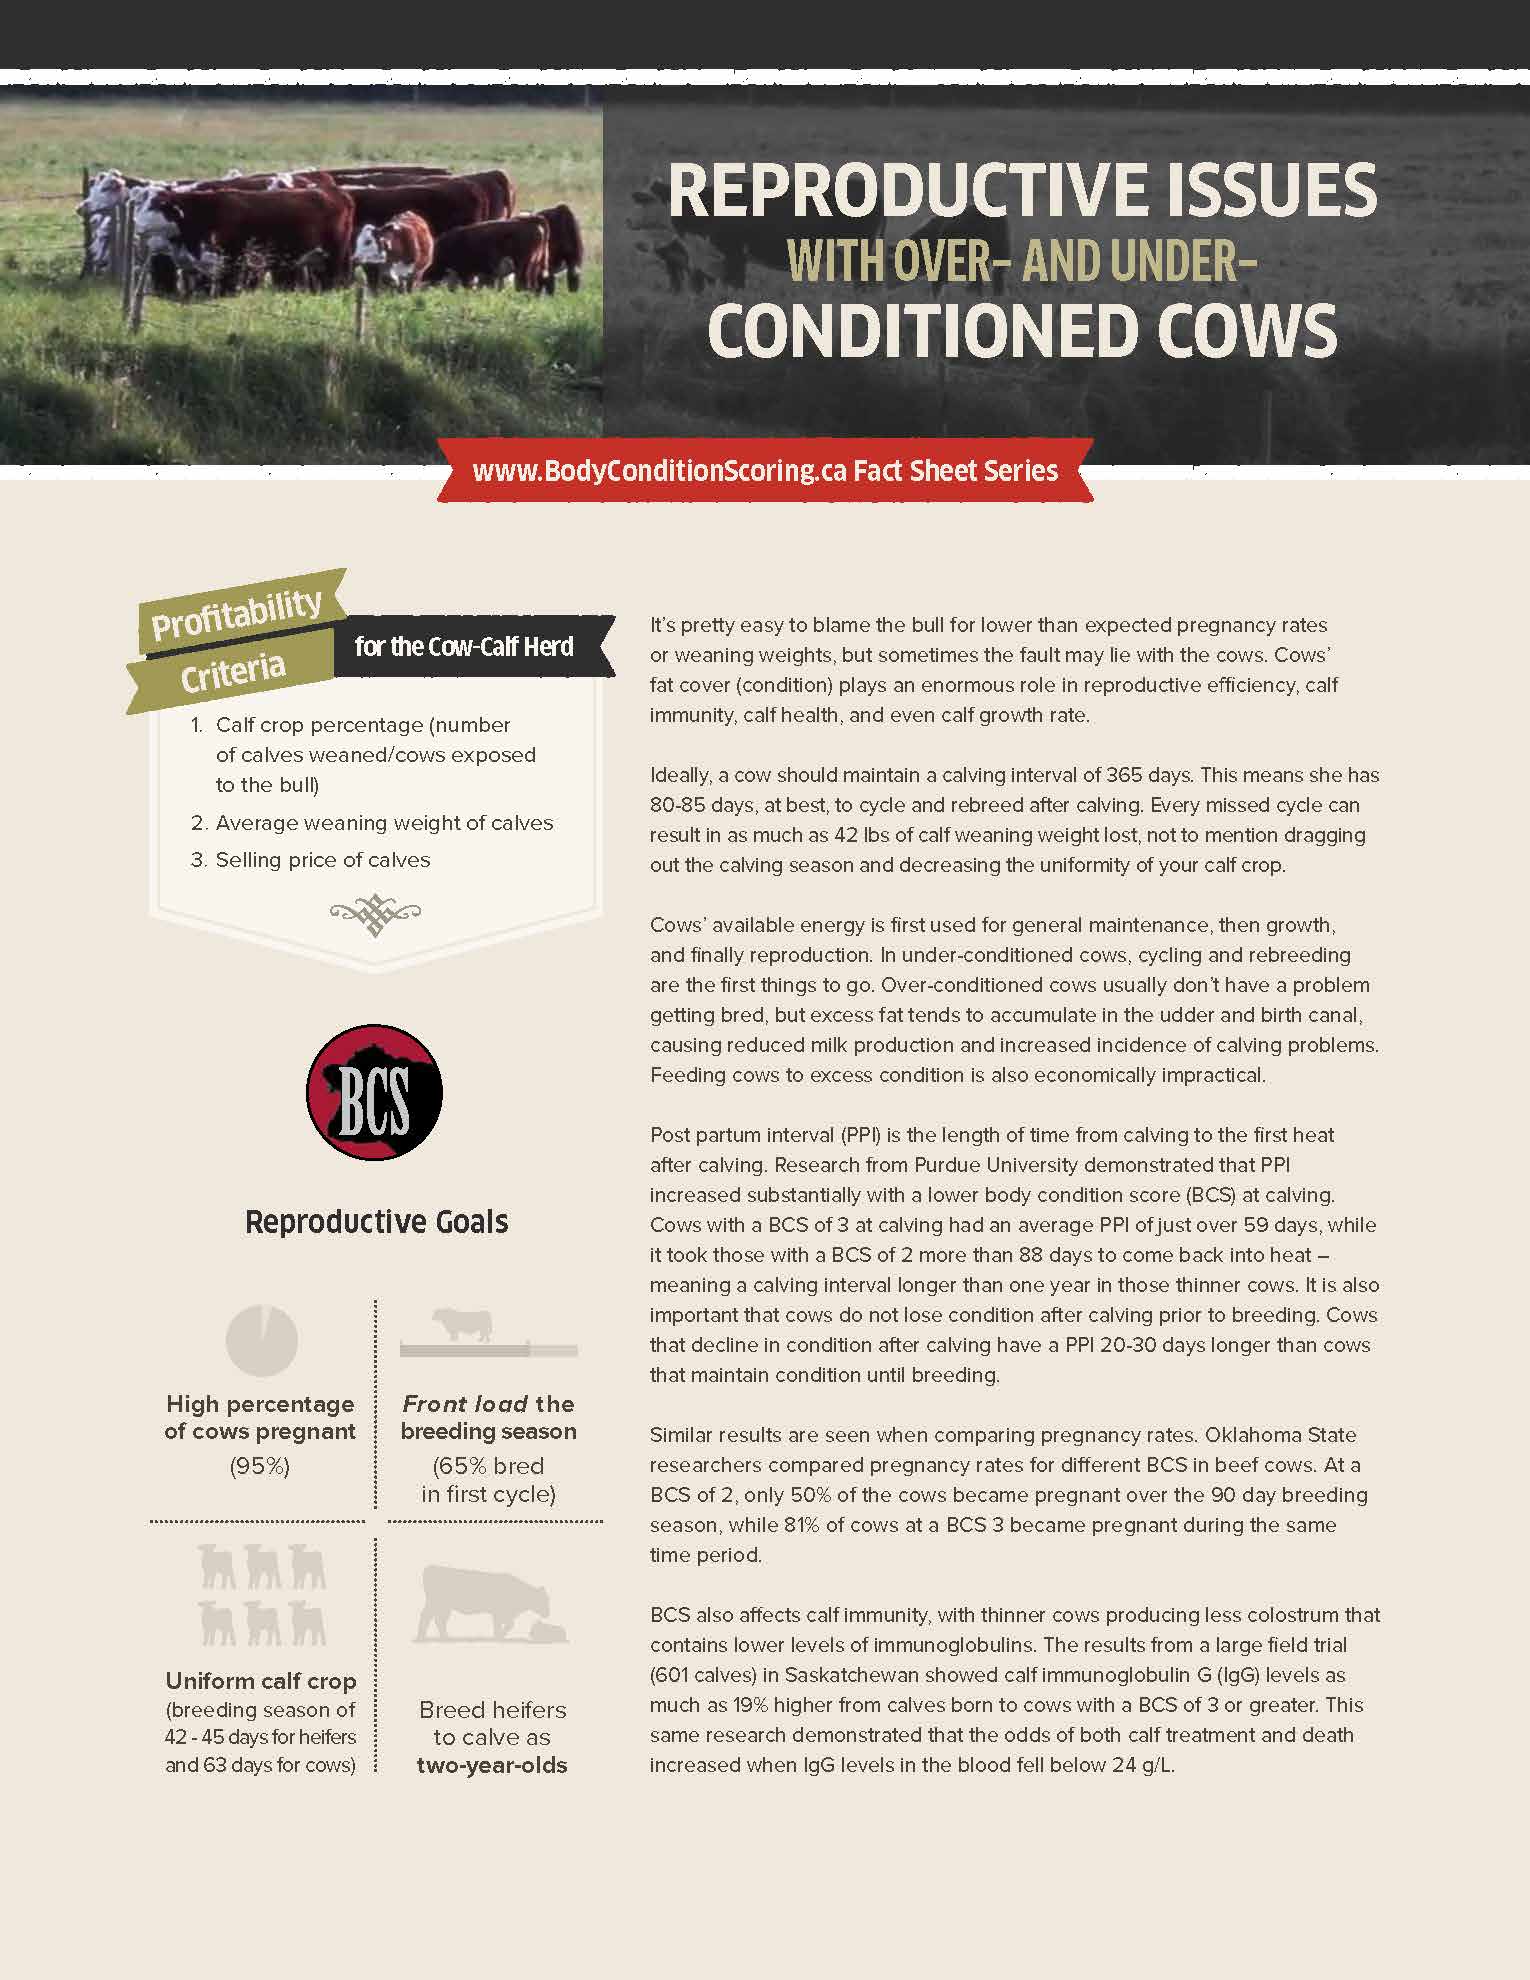 Fact sheet: Reproductive Issues with Overconditioned and Underconditioned Cows